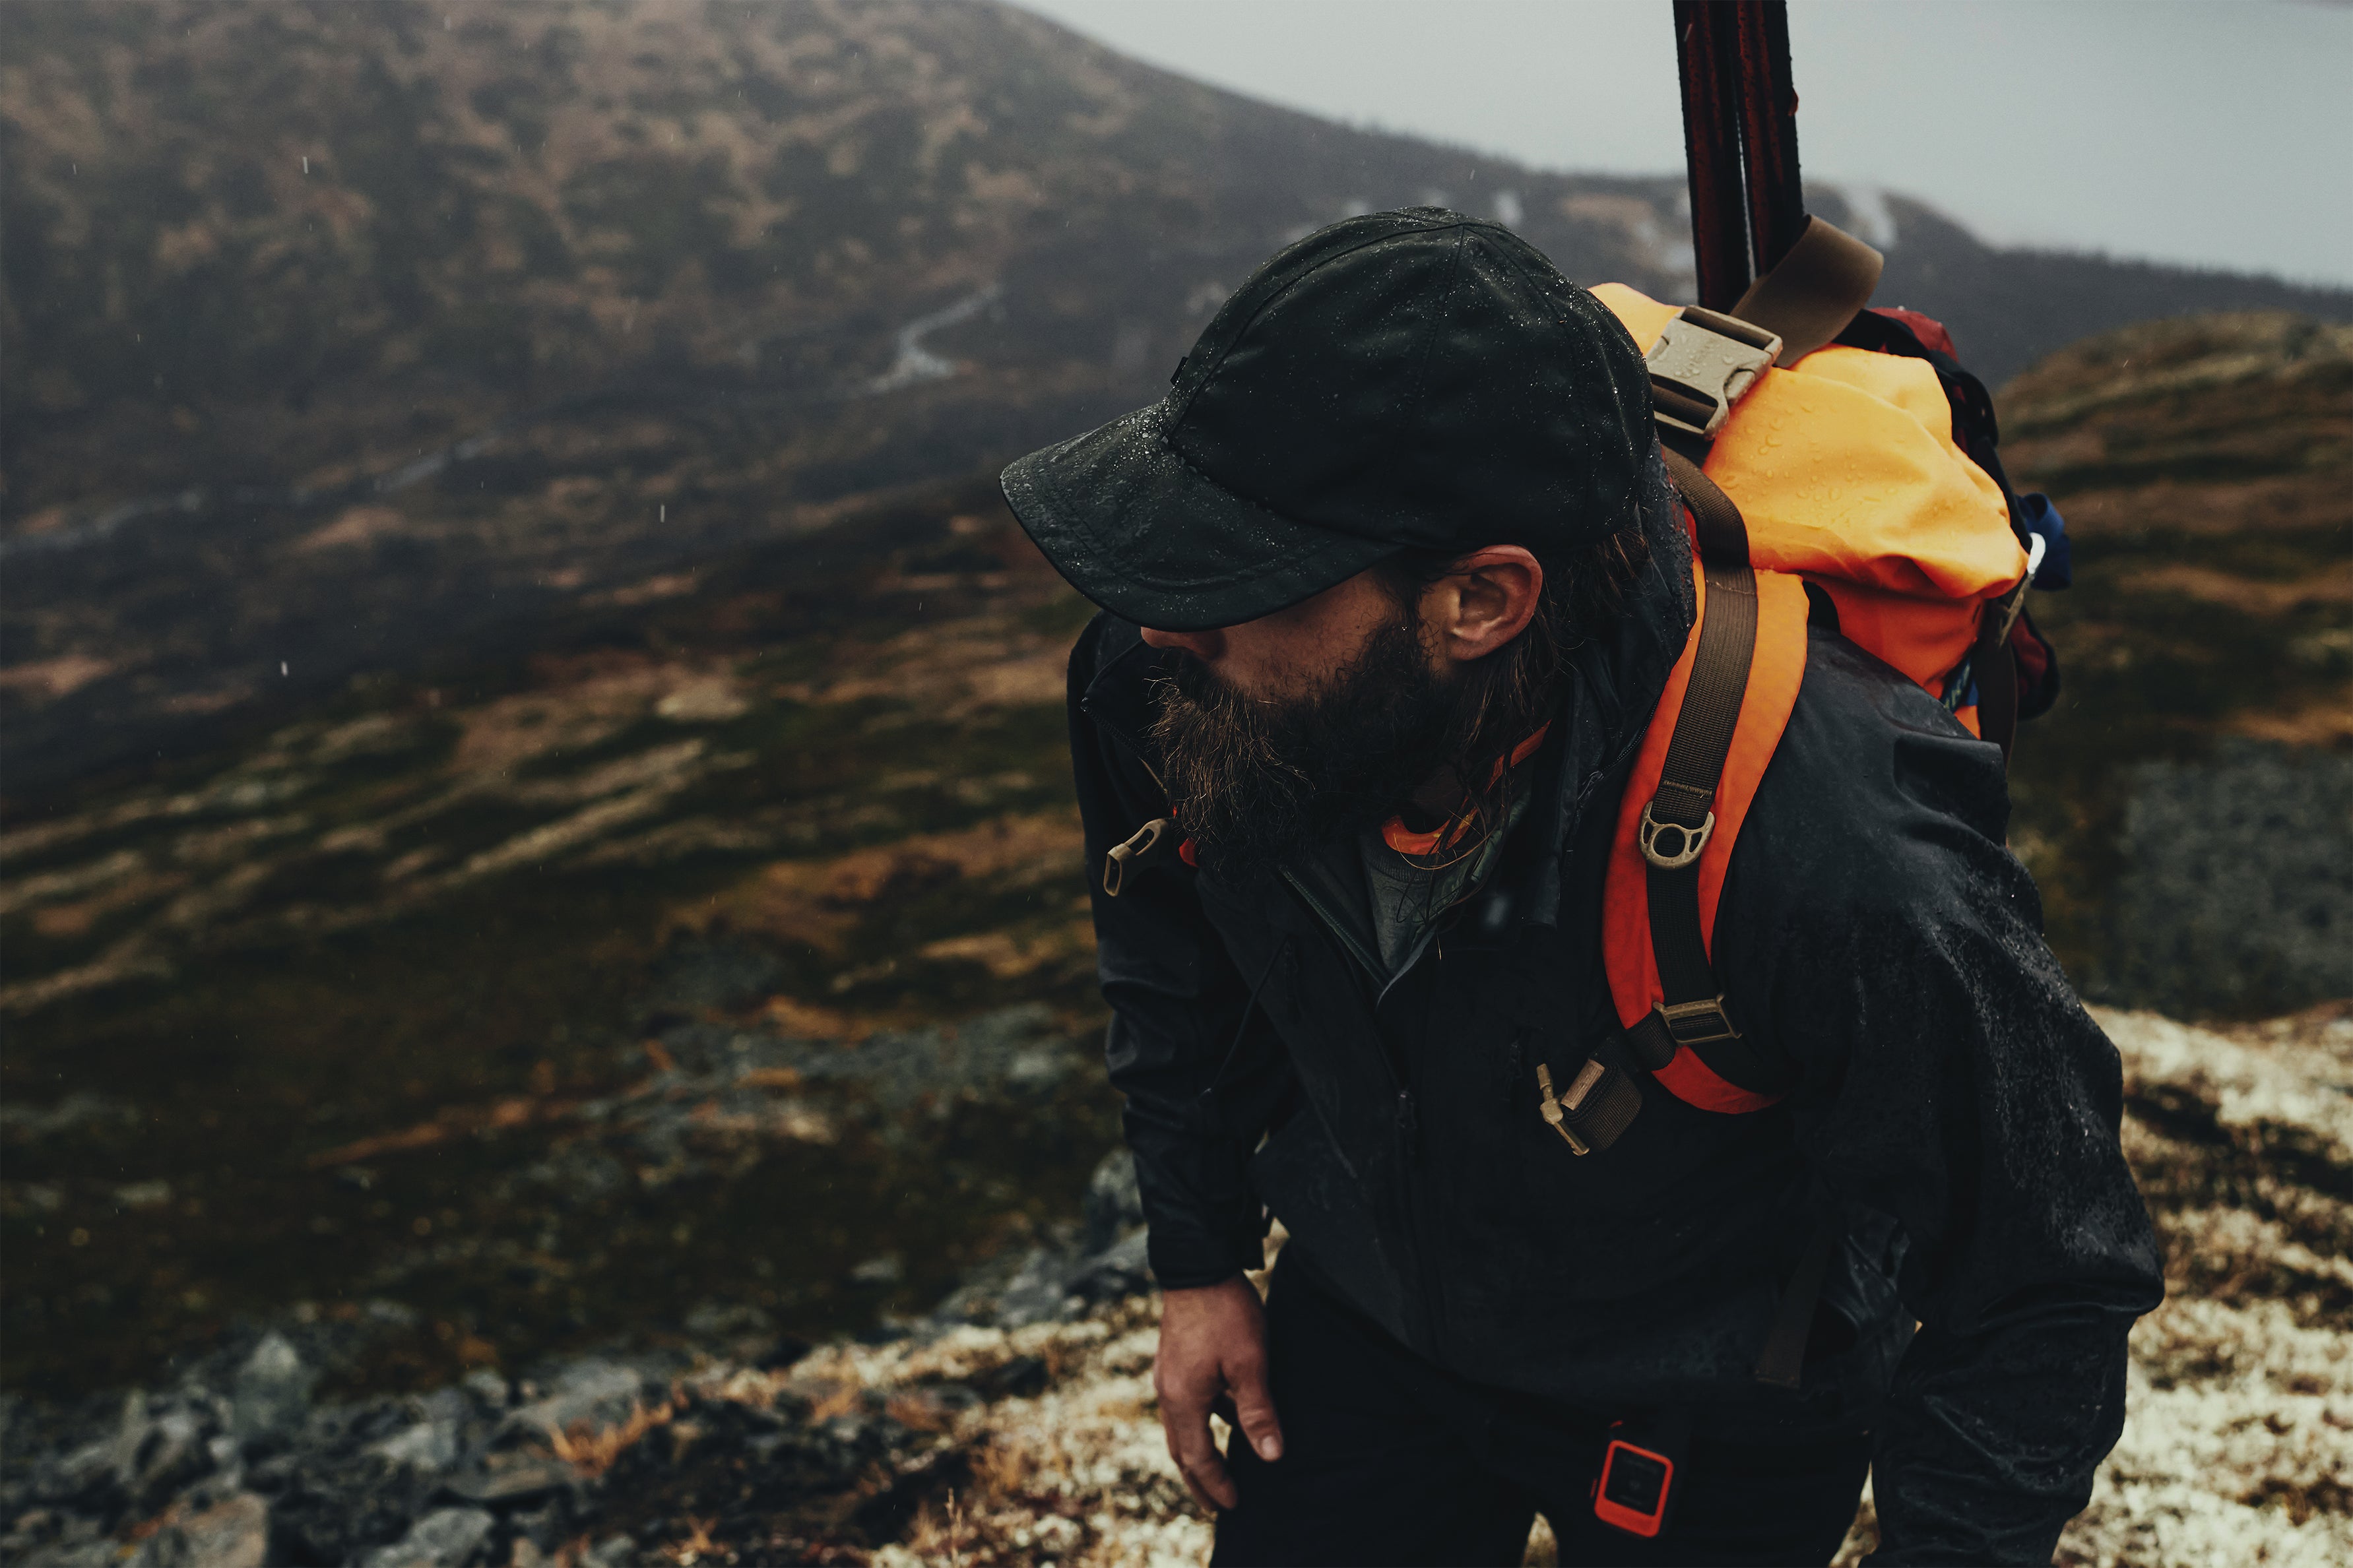 Close up of man on an outdoor hike wearing a rain jacket, cap, and orange backpack